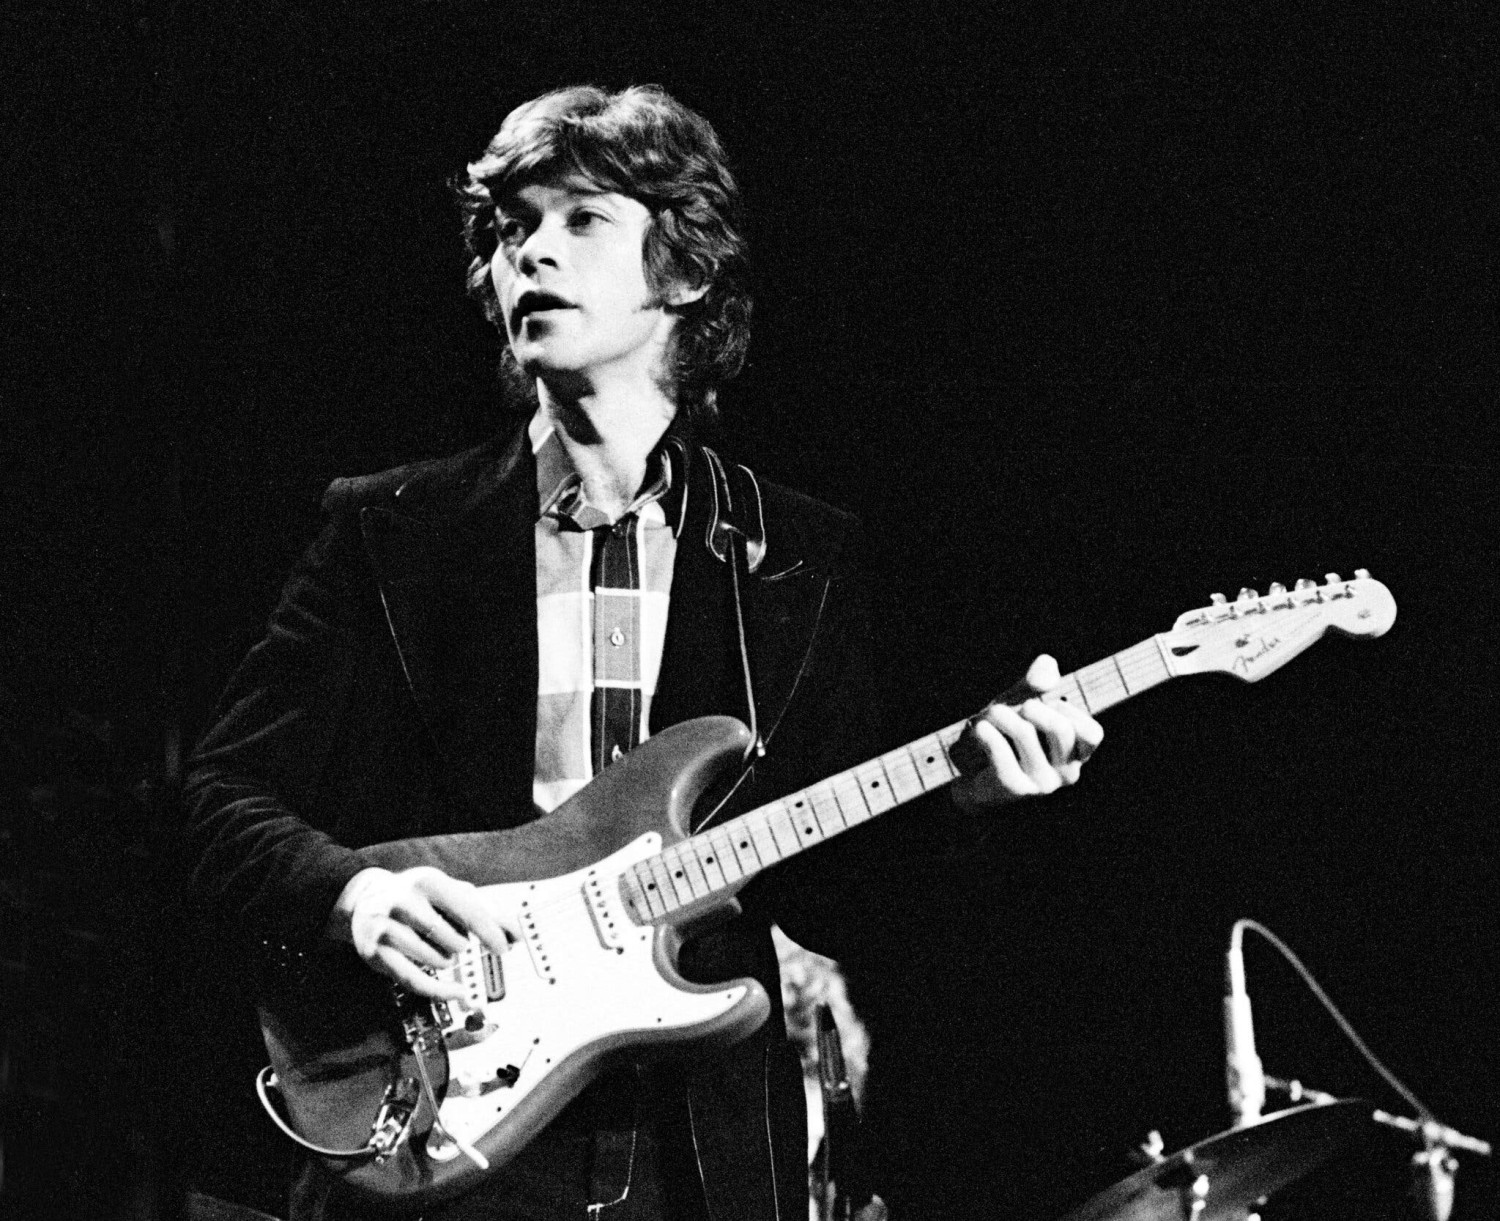 Robbie Robertson in performance with the Band in 1971. The group, for which he was the main songwriter and lead guitarist, helped inspire the Americana genre.Credit...Gijsbert Hanekroot/Redferns